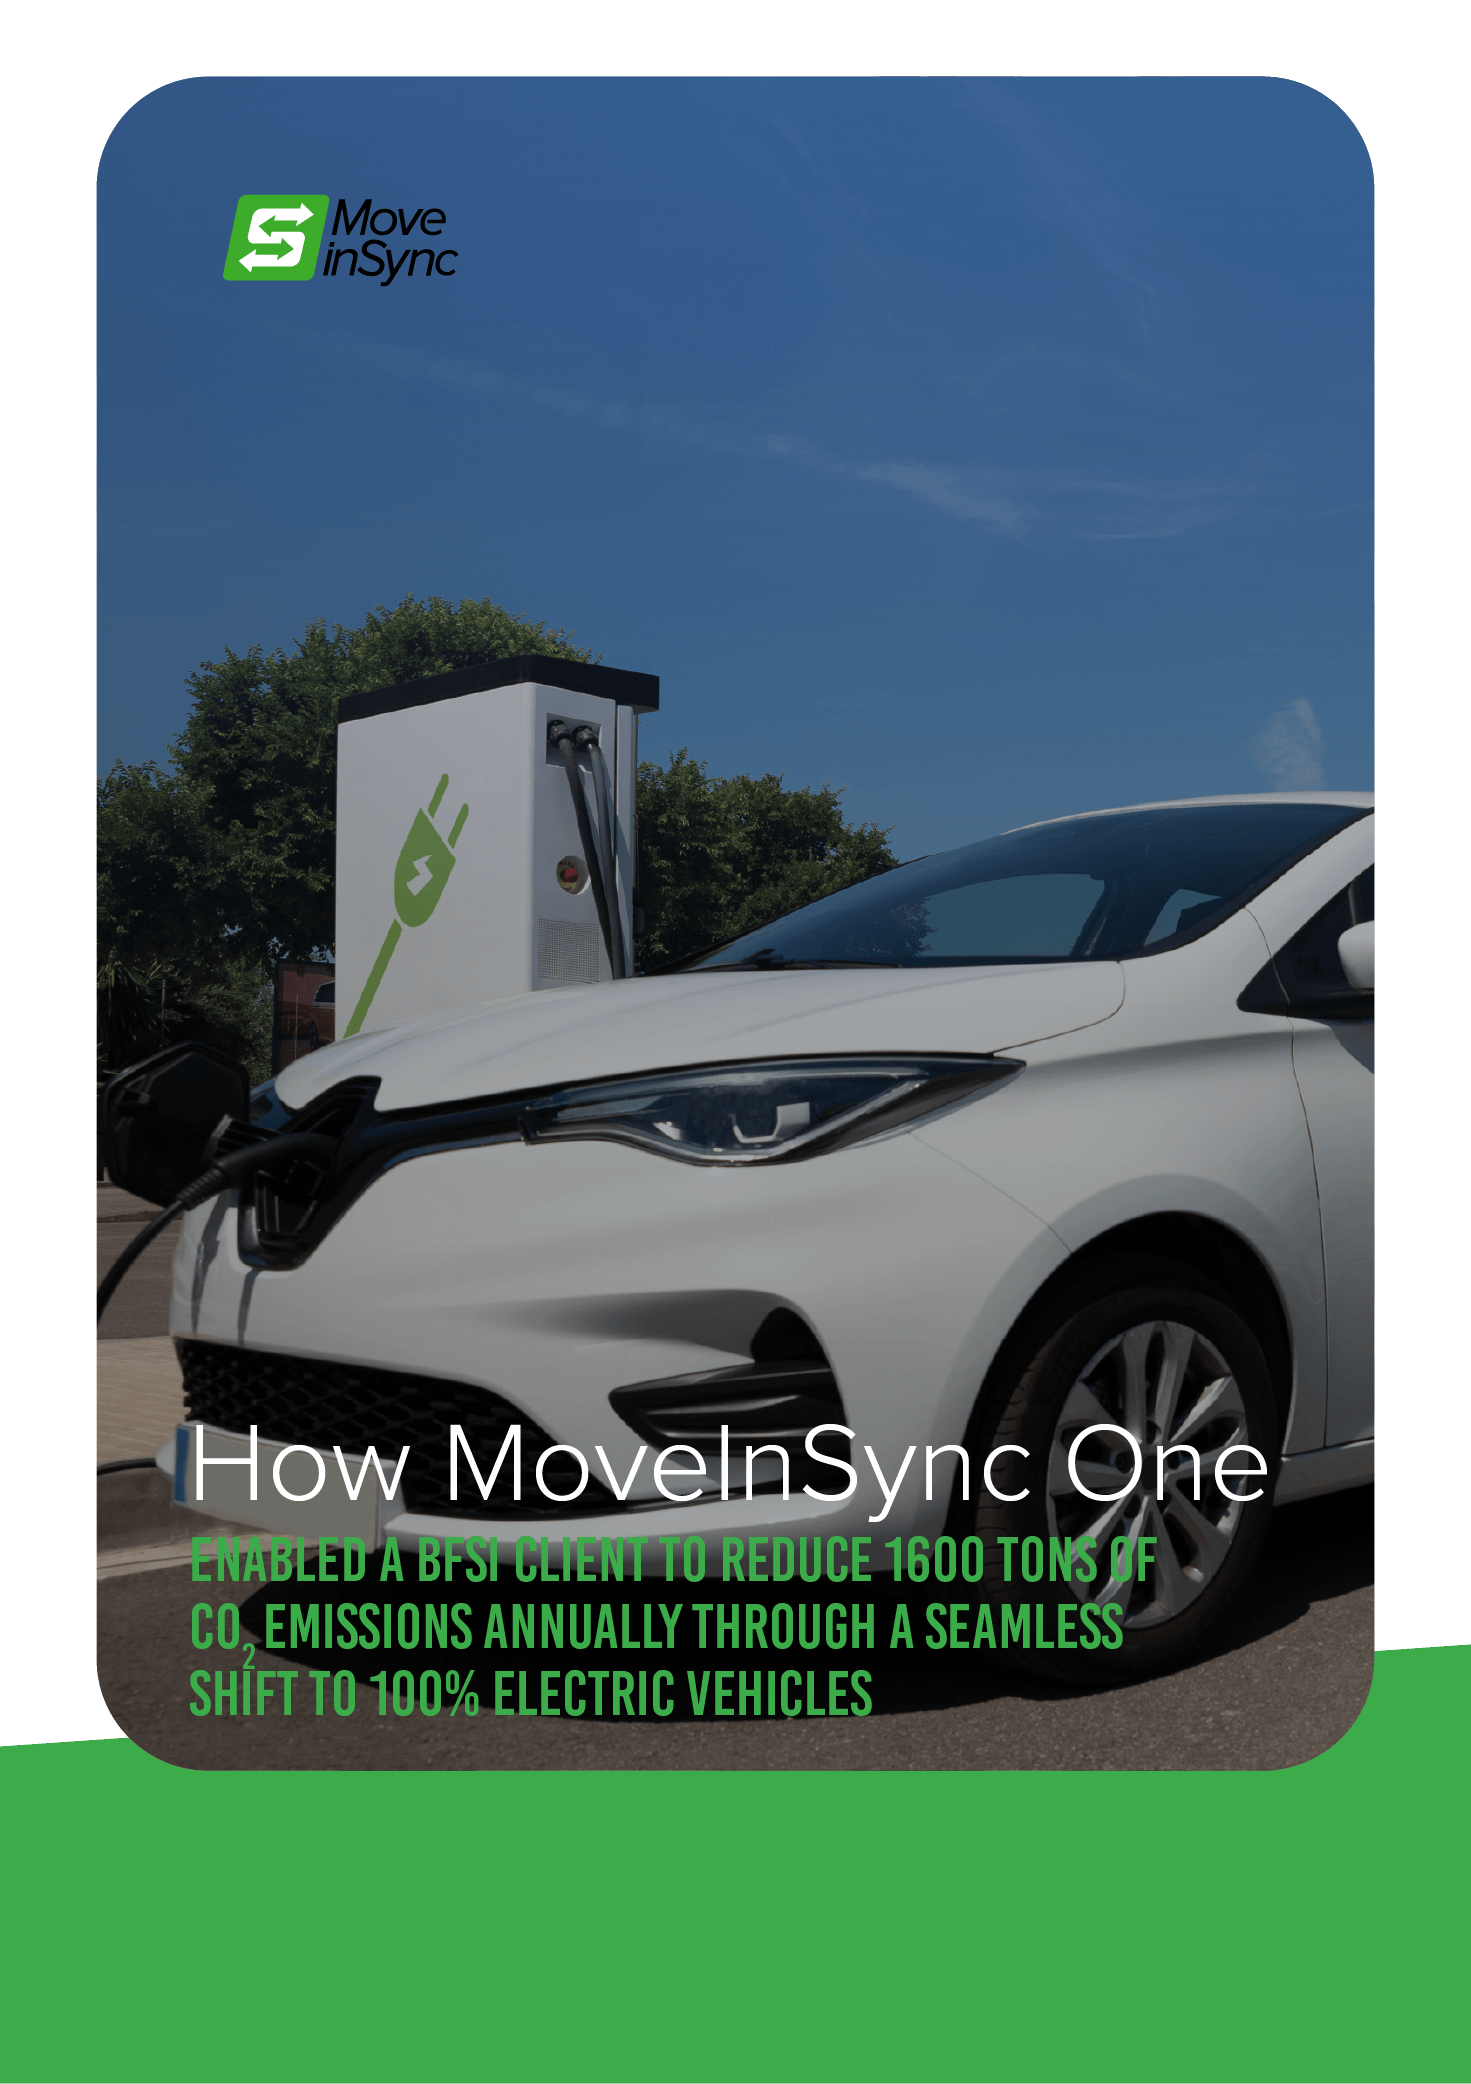 BFSI MoveInSync One Client CO2 Emissions Savings Case Study